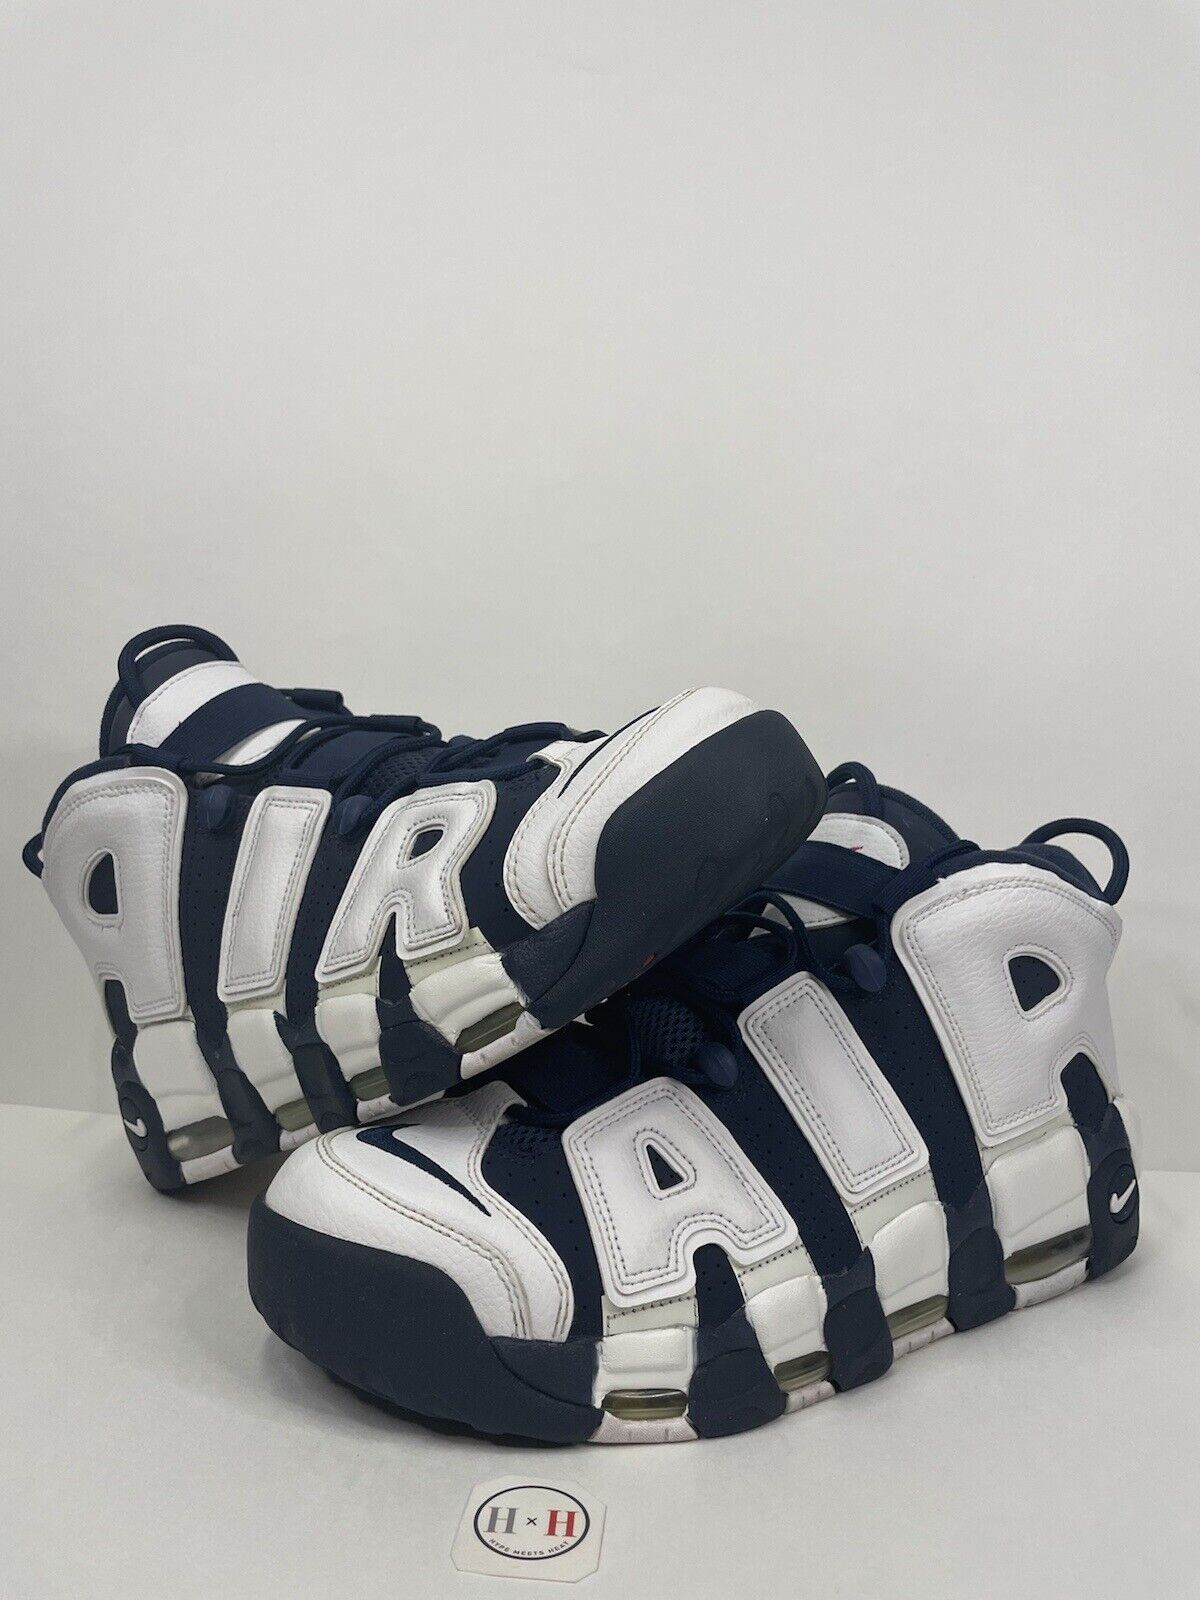 Air More Uptempo Olympic 2016 Size 11.5 414962-104 | eBay